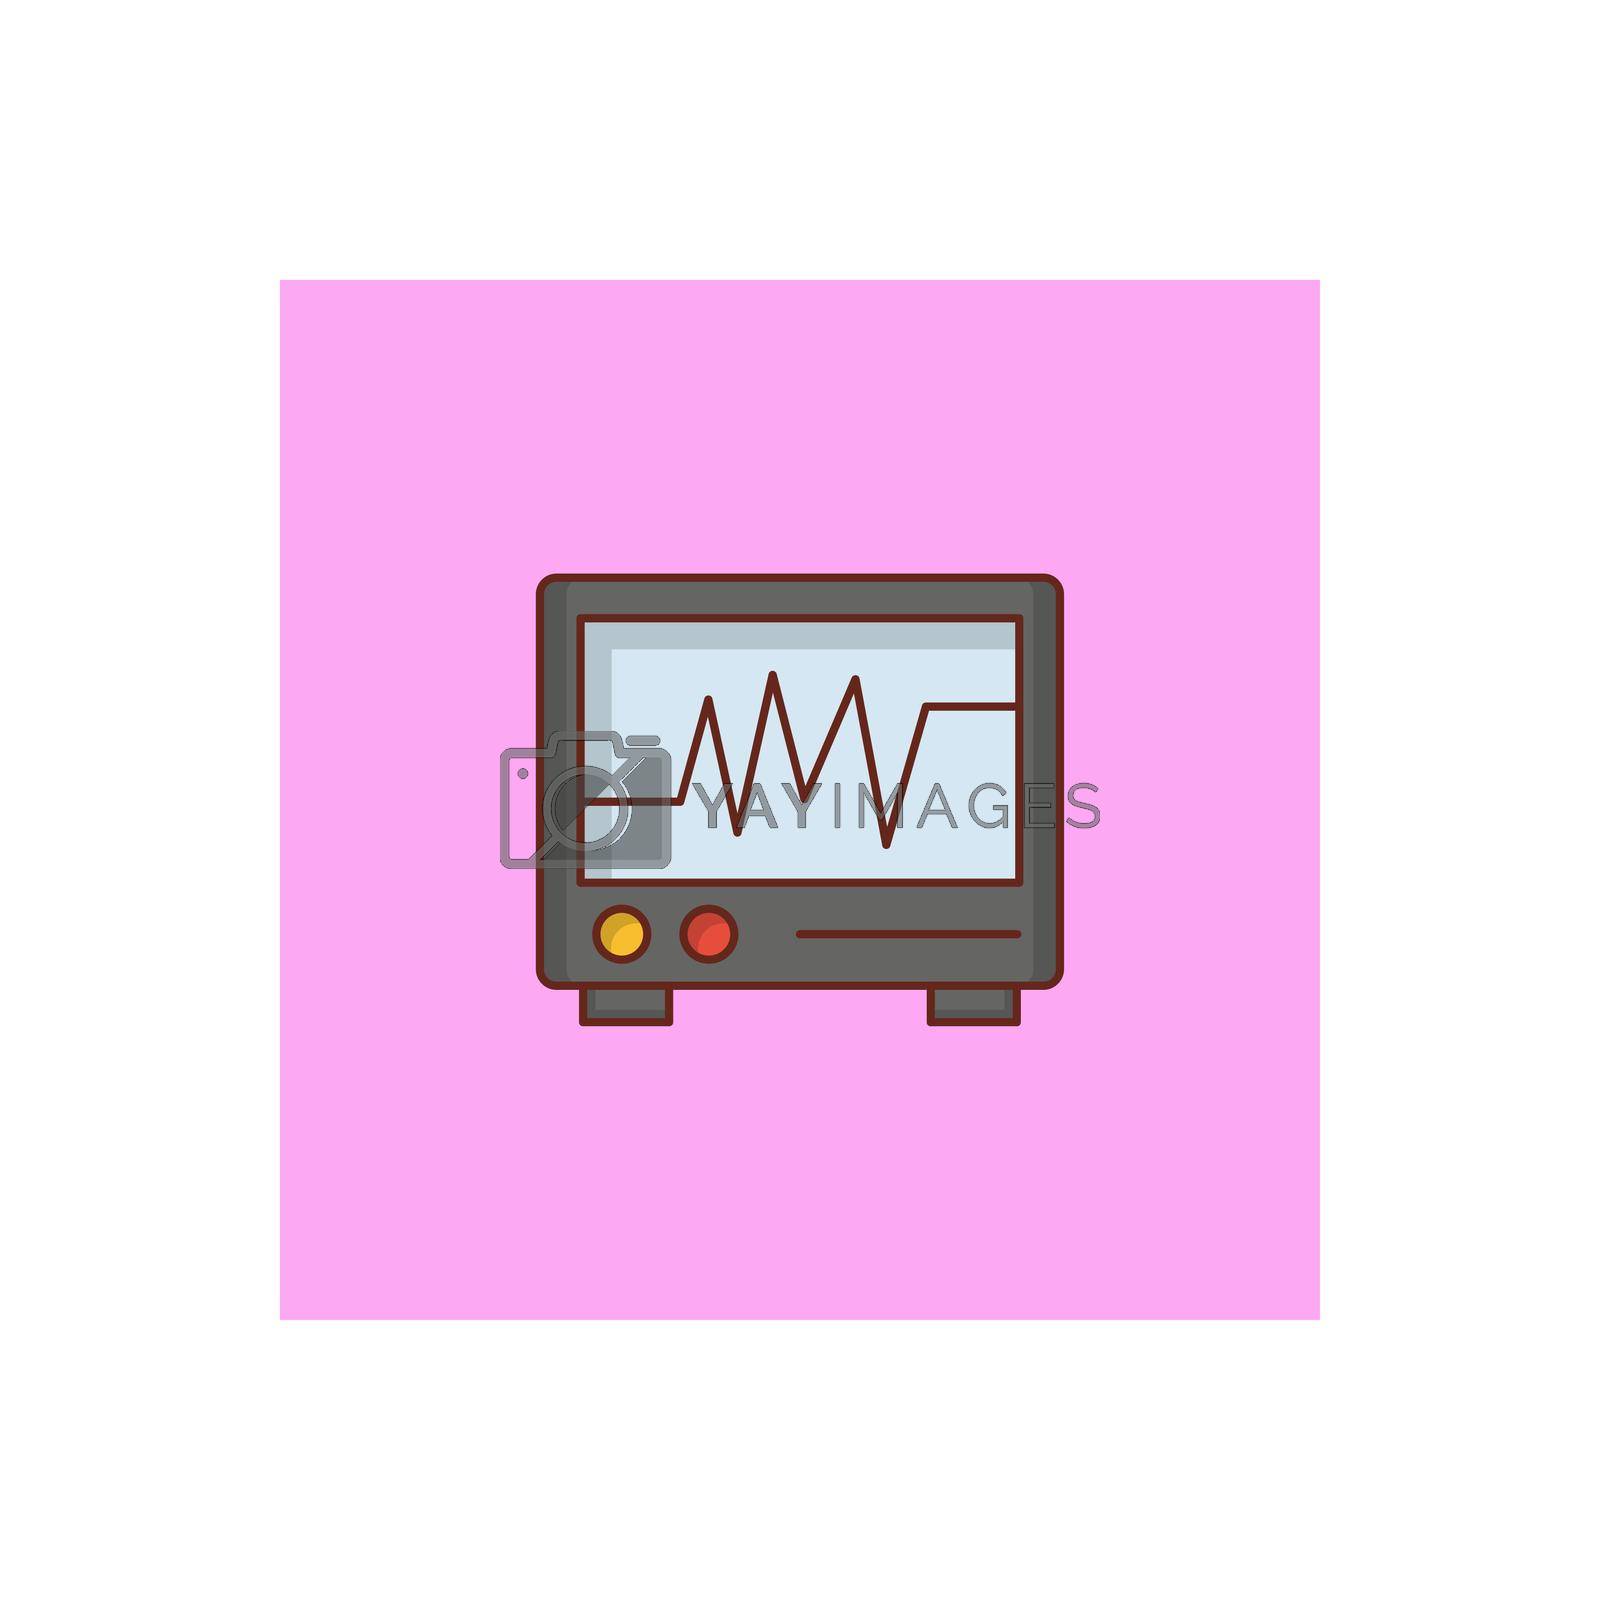 Royalty free image of monitor by FlaticonsDesign